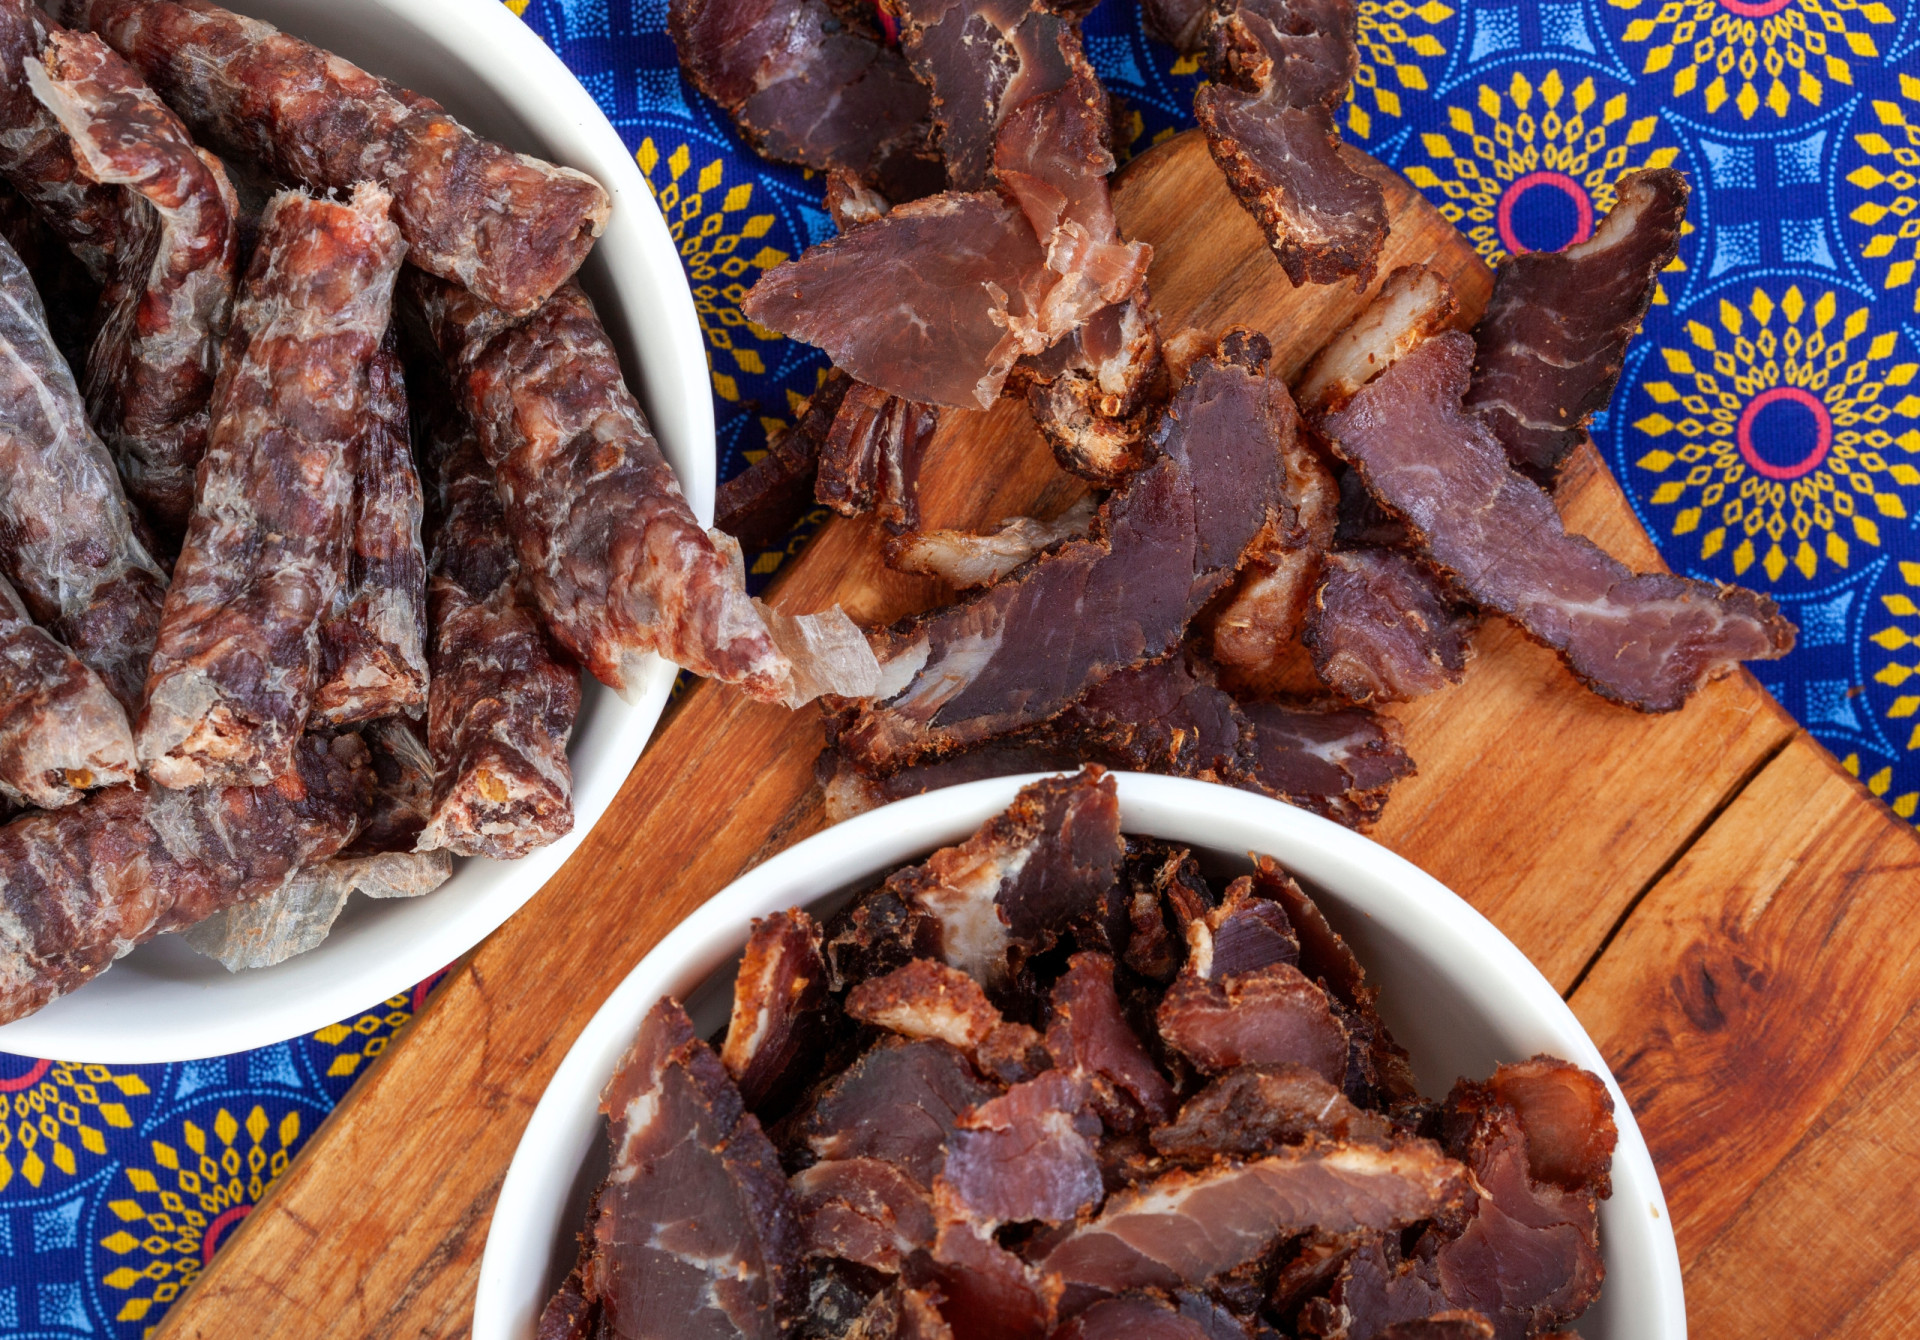 <p><span>Biltong is dried, cured meat that originated in Southern African countries. Various types of meat are used, from beef to game meats like ostrich.</span></p><p>You may also like:<a href="https://www.starsinsider.com/n/438839?utm_source=msn.com&utm_medium=display&utm_campaign=referral_description&utm_content=707039en-us"> The best whiskey cocktails you just have to try</a></p>